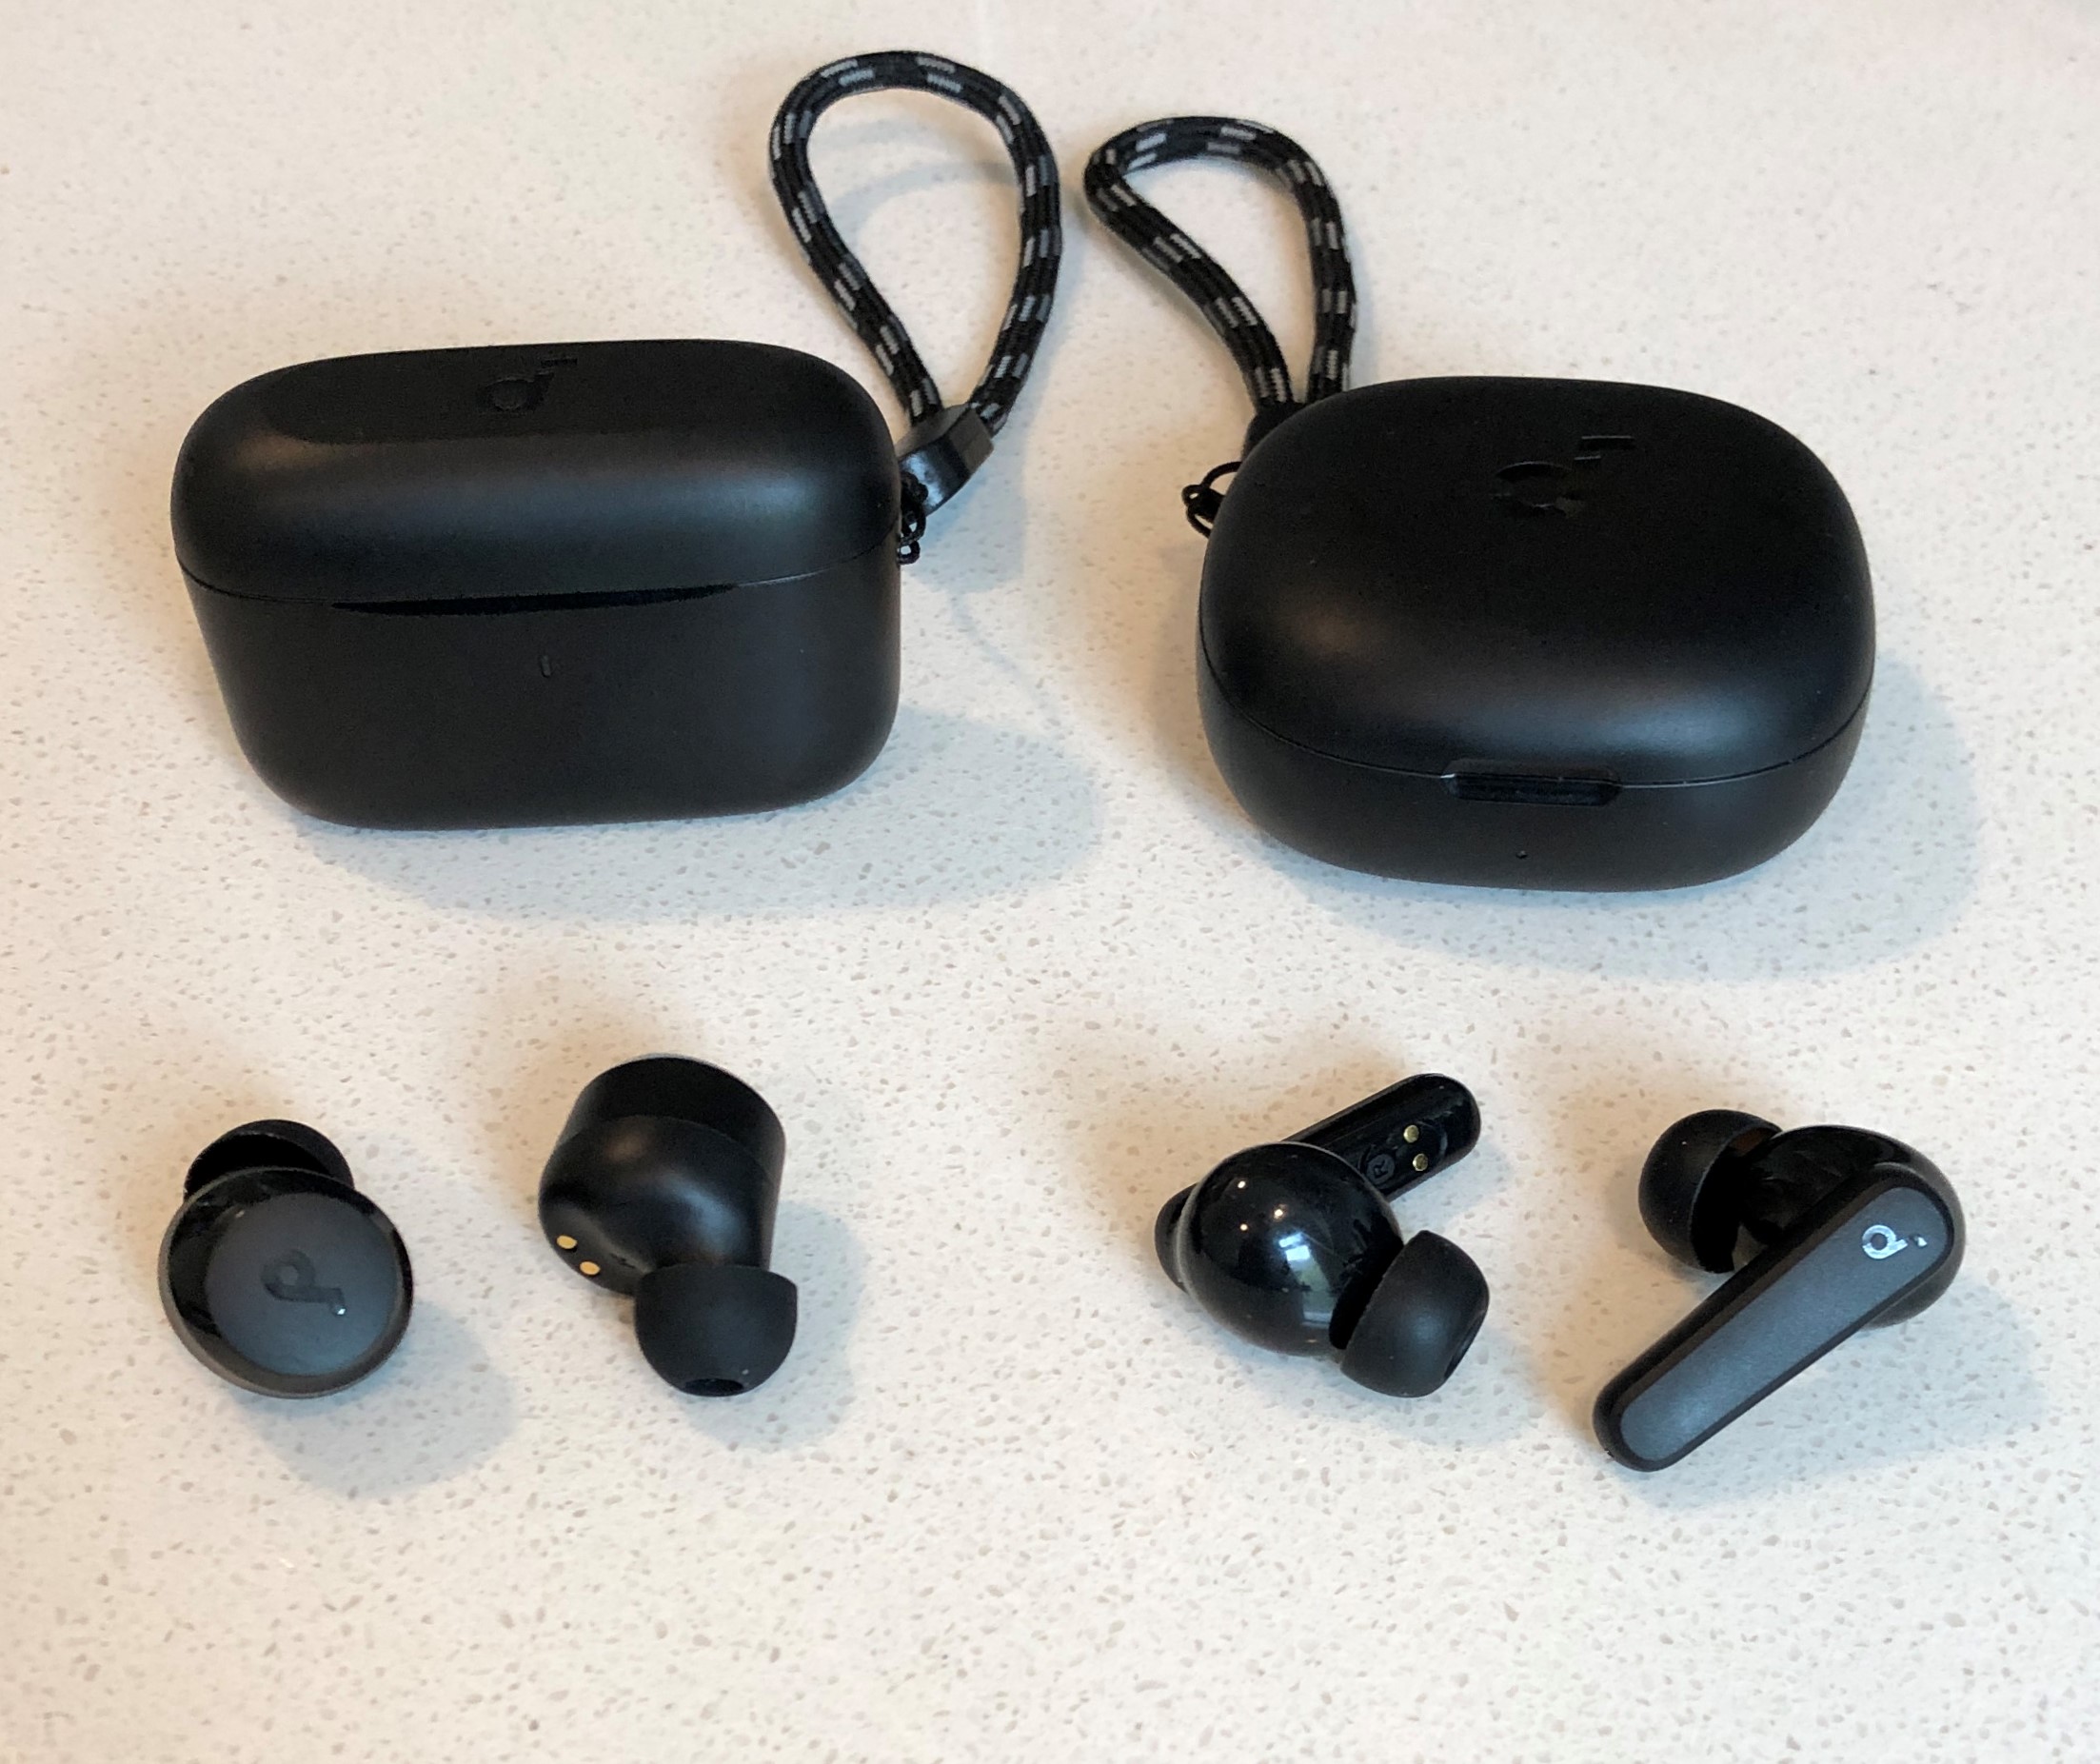 Soundcore A20i vs P20i charging case and wireless earbuds